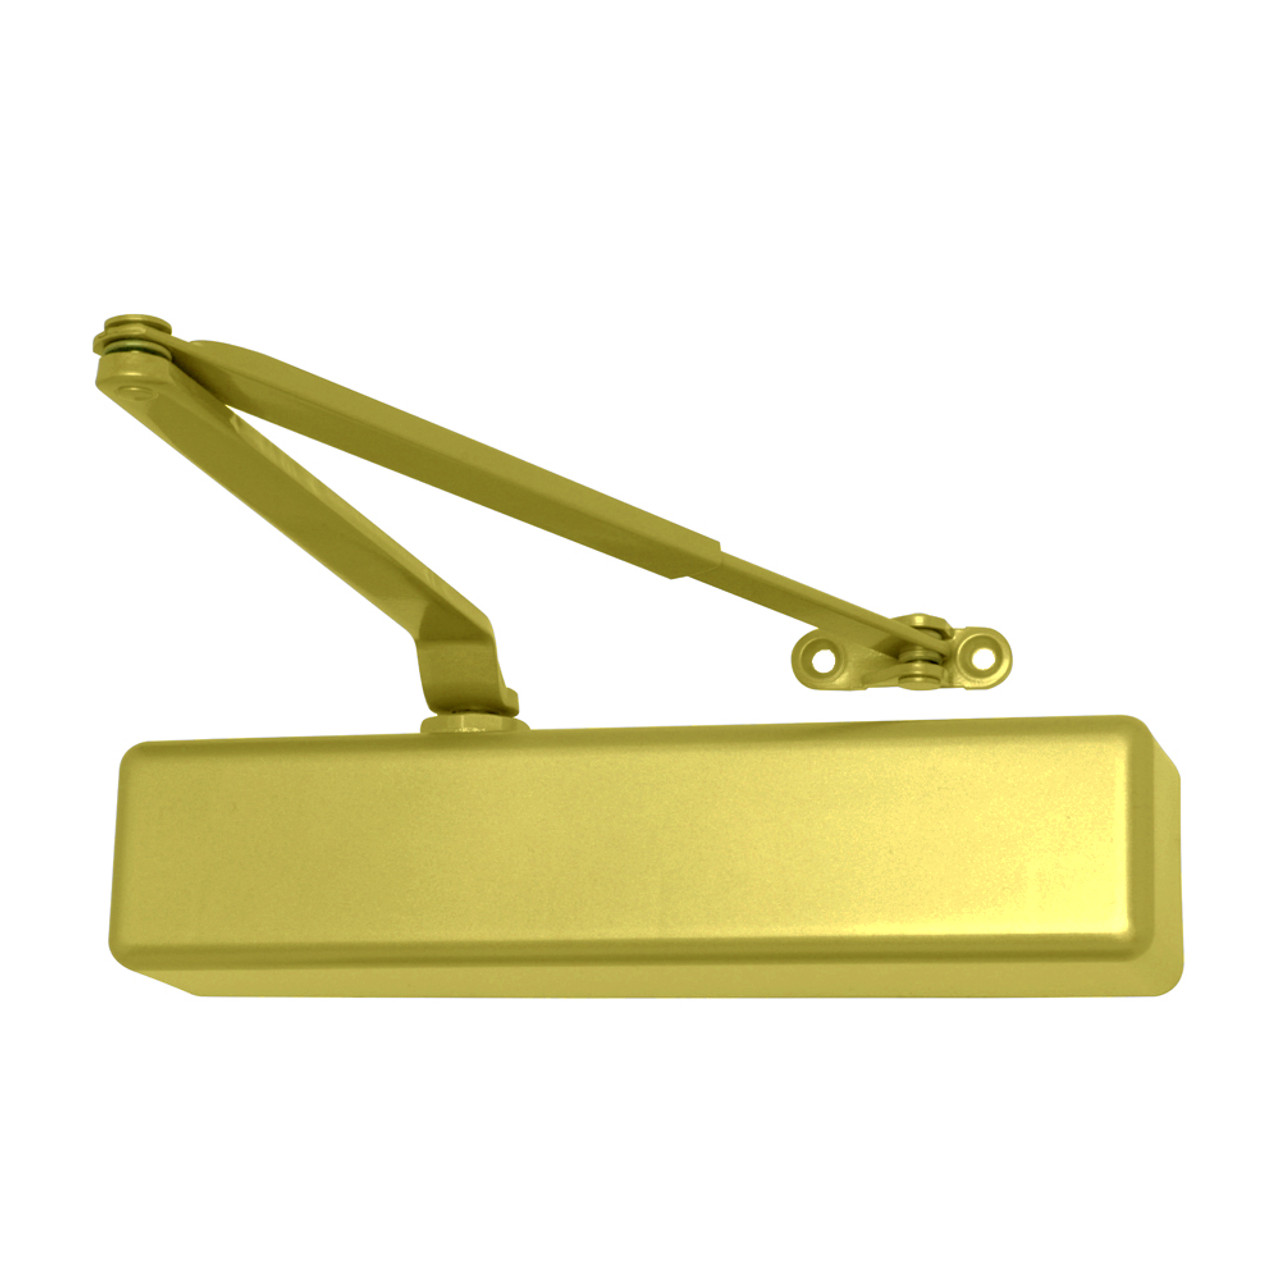 1461-Rw-PA-BRASS LCN Door Closer Regular Arm with Parallel Arm Shoe in Brass Finish